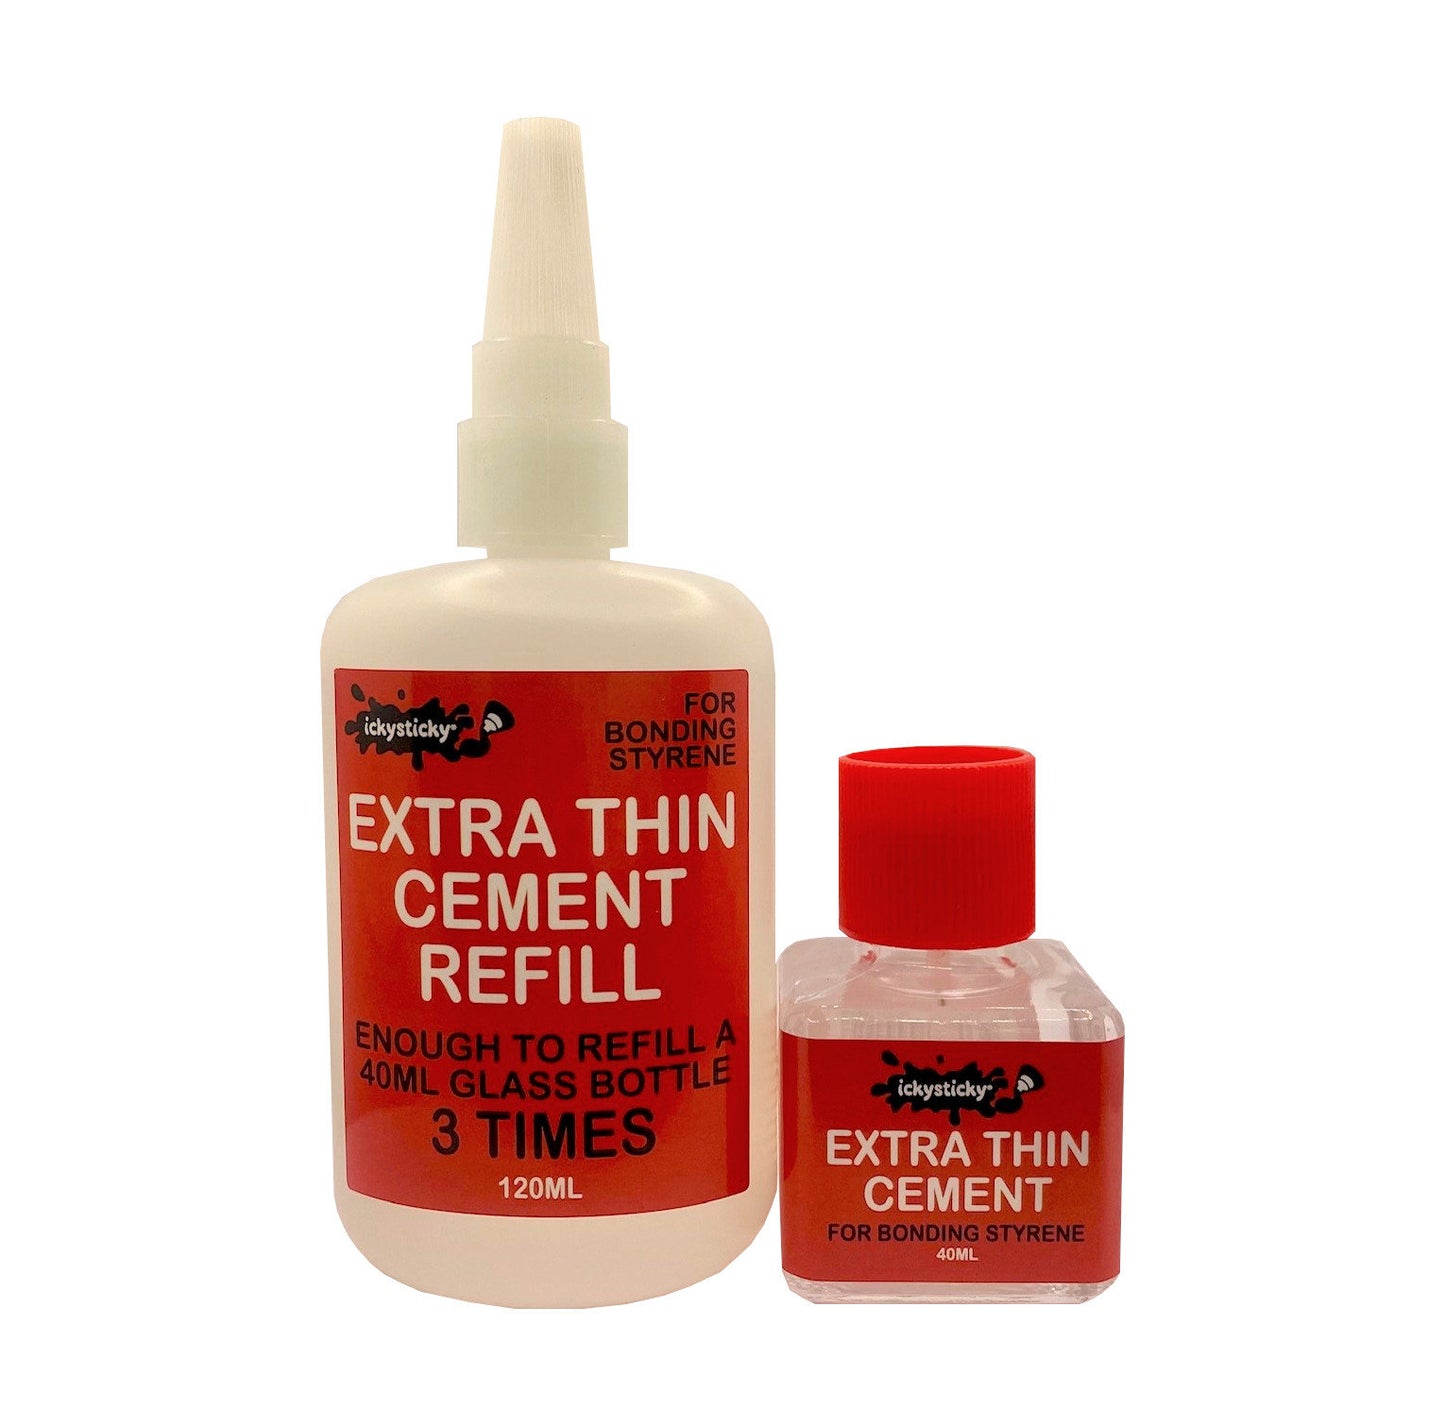 EXTRA THIN CEMENT 40ML